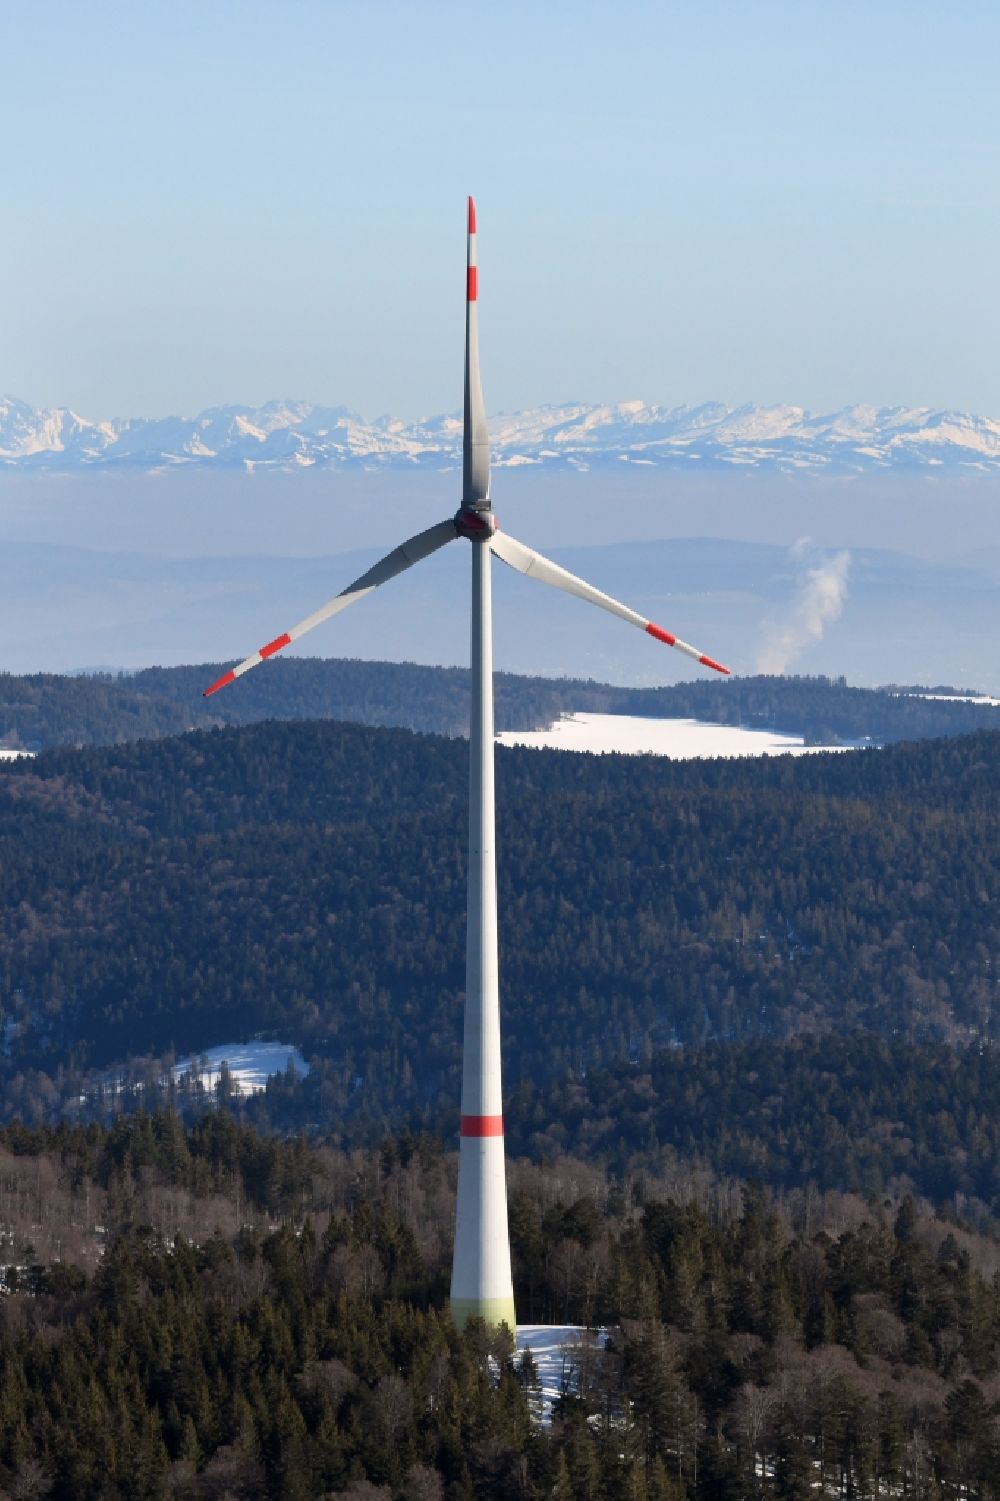 Aerial photograph Schopfheim - Wintry snowy landscape at the snow covered Rohrenkopf, the local mountain of Gersbach, a district of Schopfheim in Baden-Wuerttemberg. Wind turbines produce renewable energy in the wind farm. Looking over the mountains of the Black Forest to the Swiss Alps